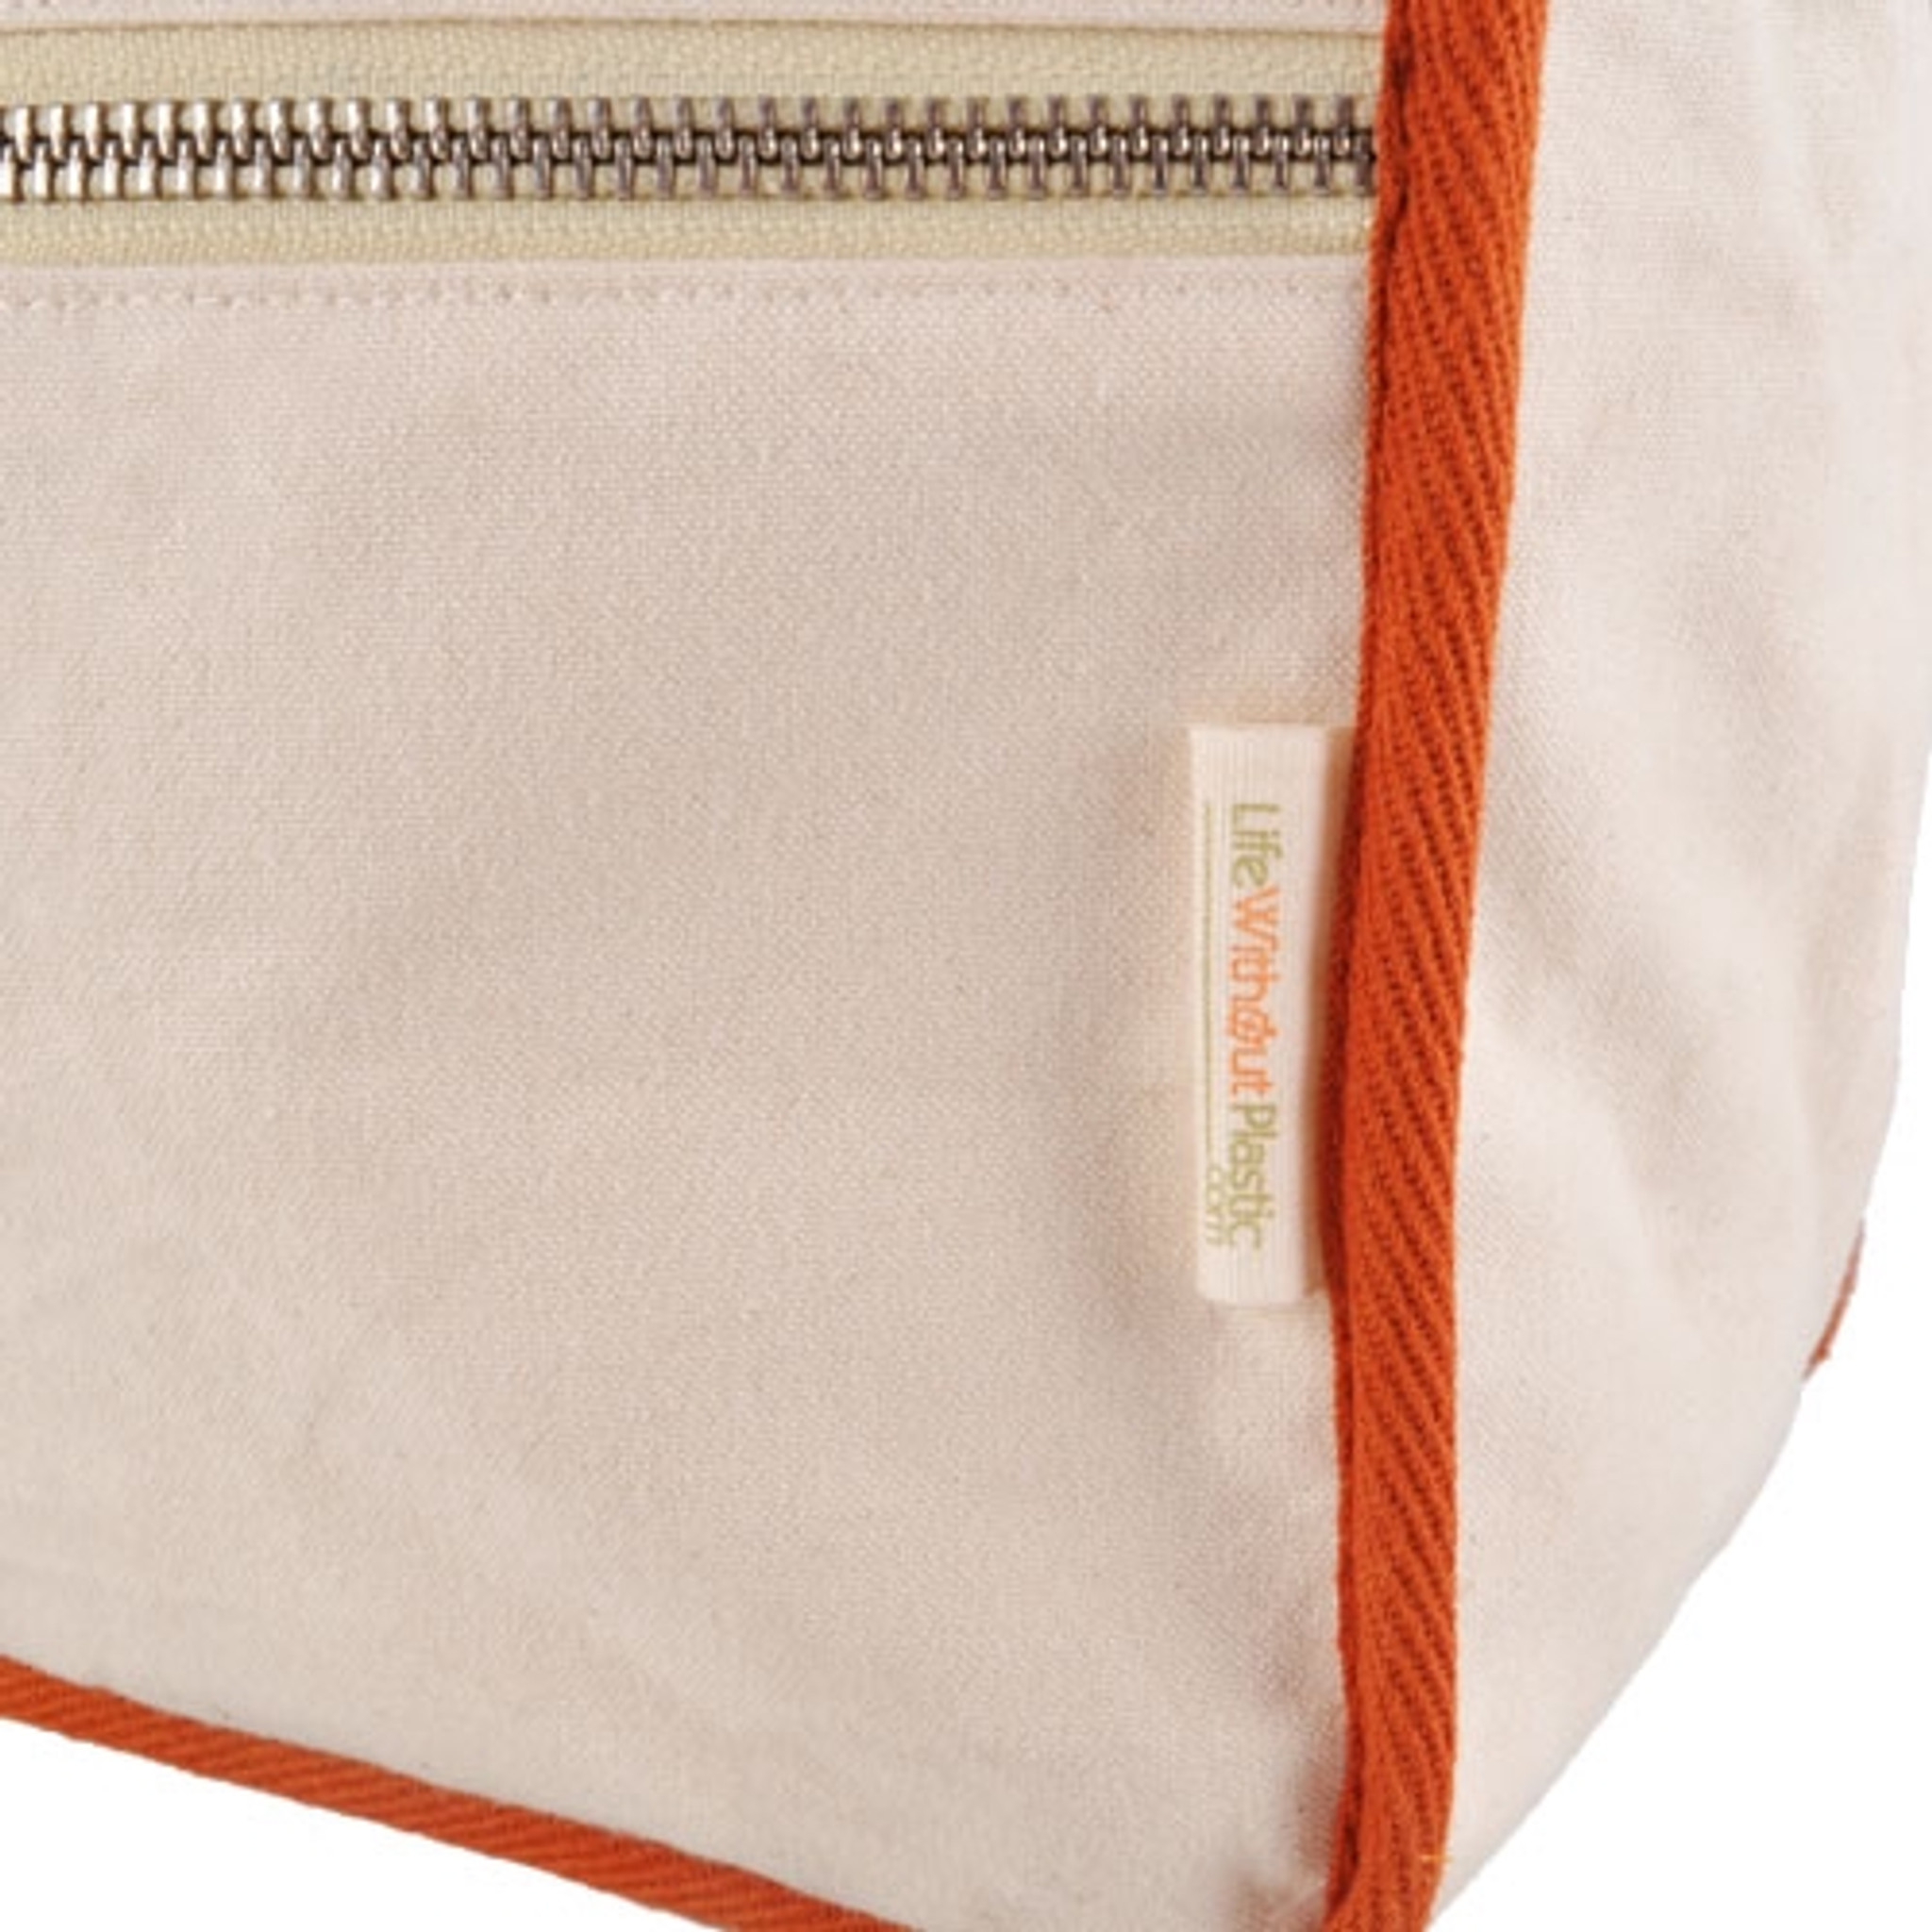 NEW with Tags - Lunch/Tote Bag for Women Lunch Box Insulated Lunch